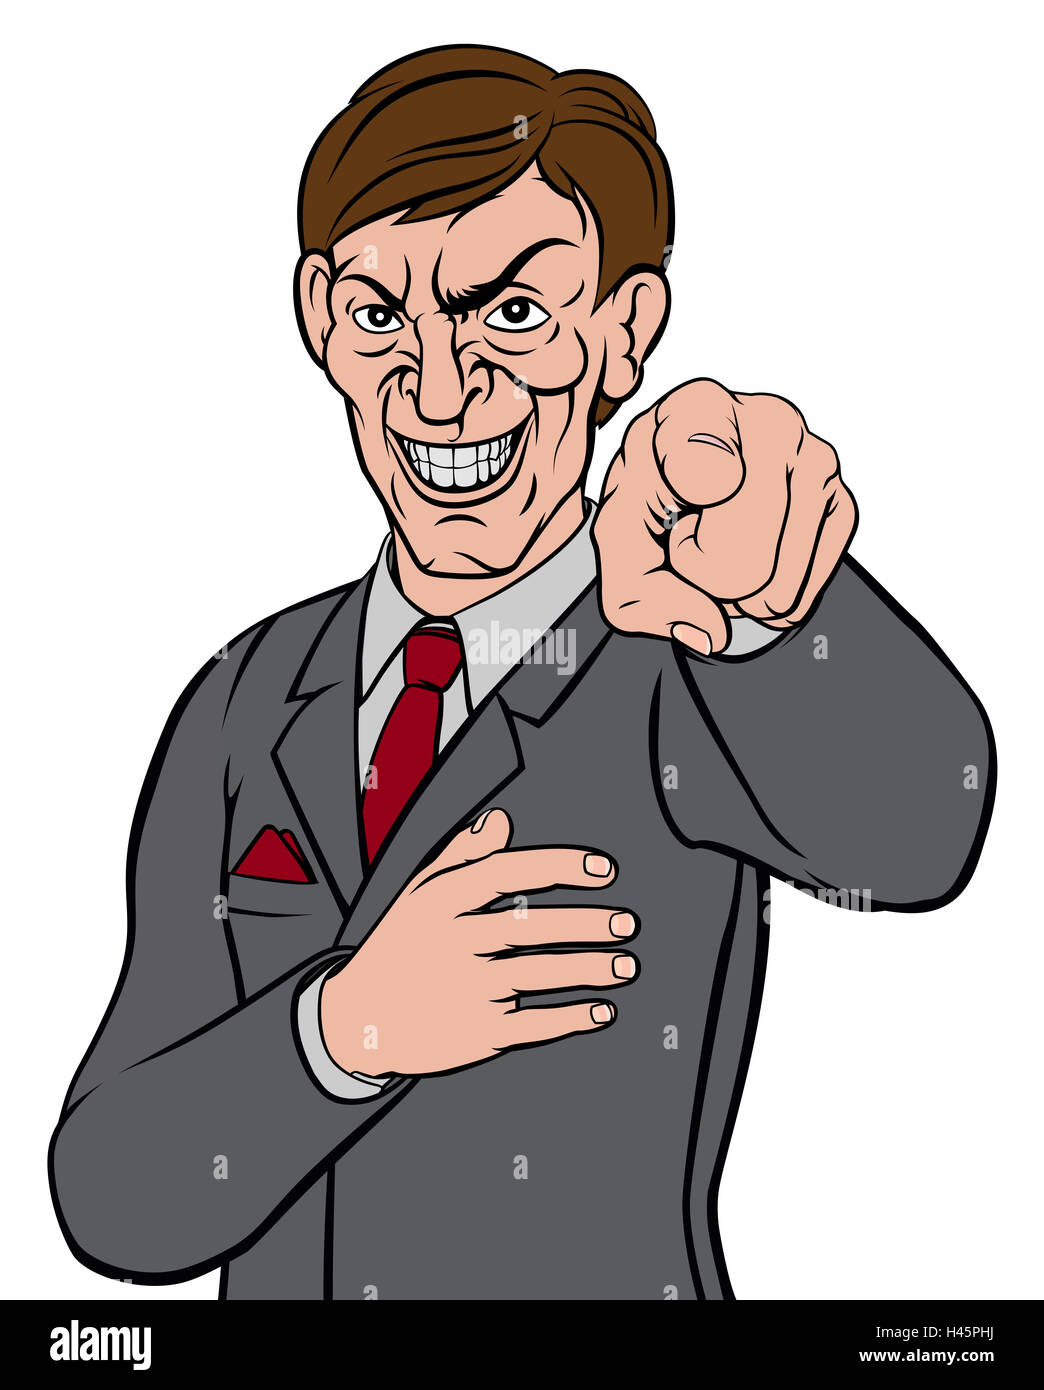 Cartoon evil looking business man in a suit and tie pointing his finger in a wants you gesture Stock Photo